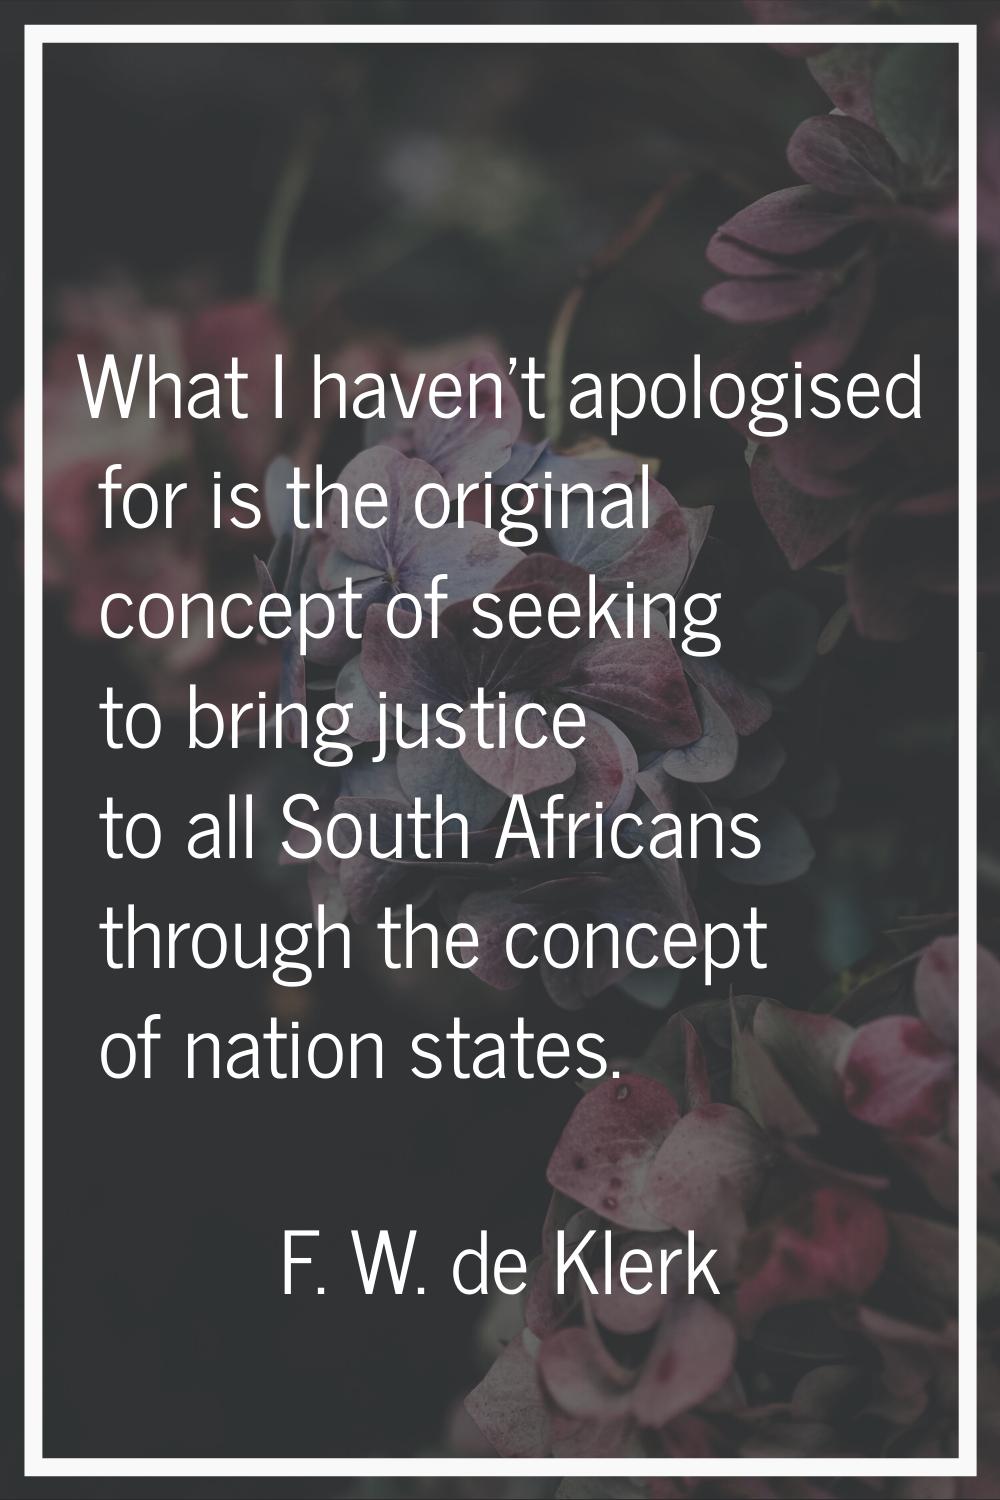 What I haven't apologised for is the original concept of seeking to bring justice to all South Afri